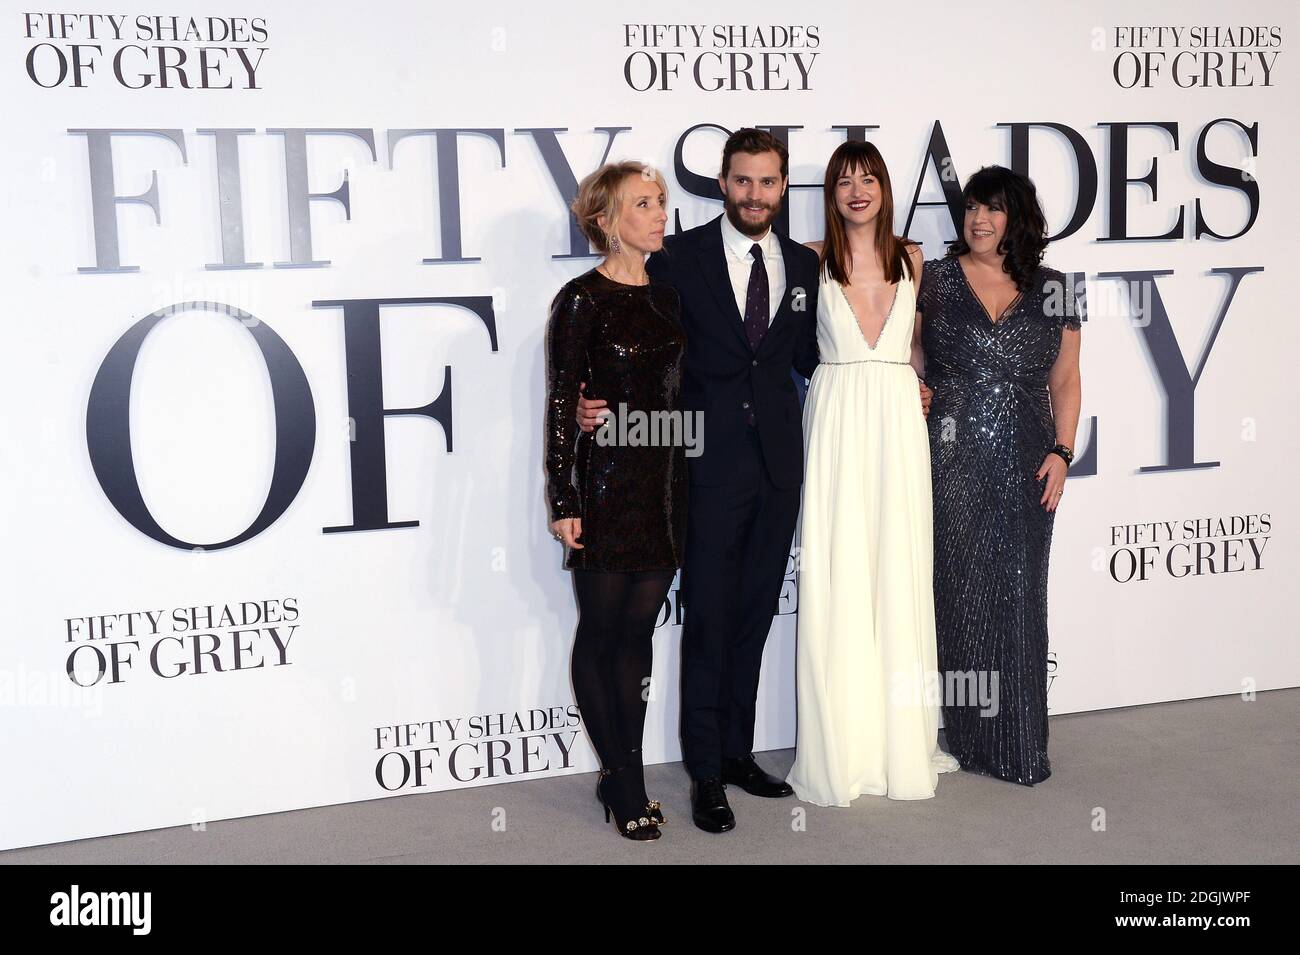 (left to right) Sam Taylor-Johnson, Jamie Dornan, Dakota Johnson and E L James attending the UK film premiere of Fifty Shades Of Grey held at the Odeon cinema in Leicester Square, London Stock Photo